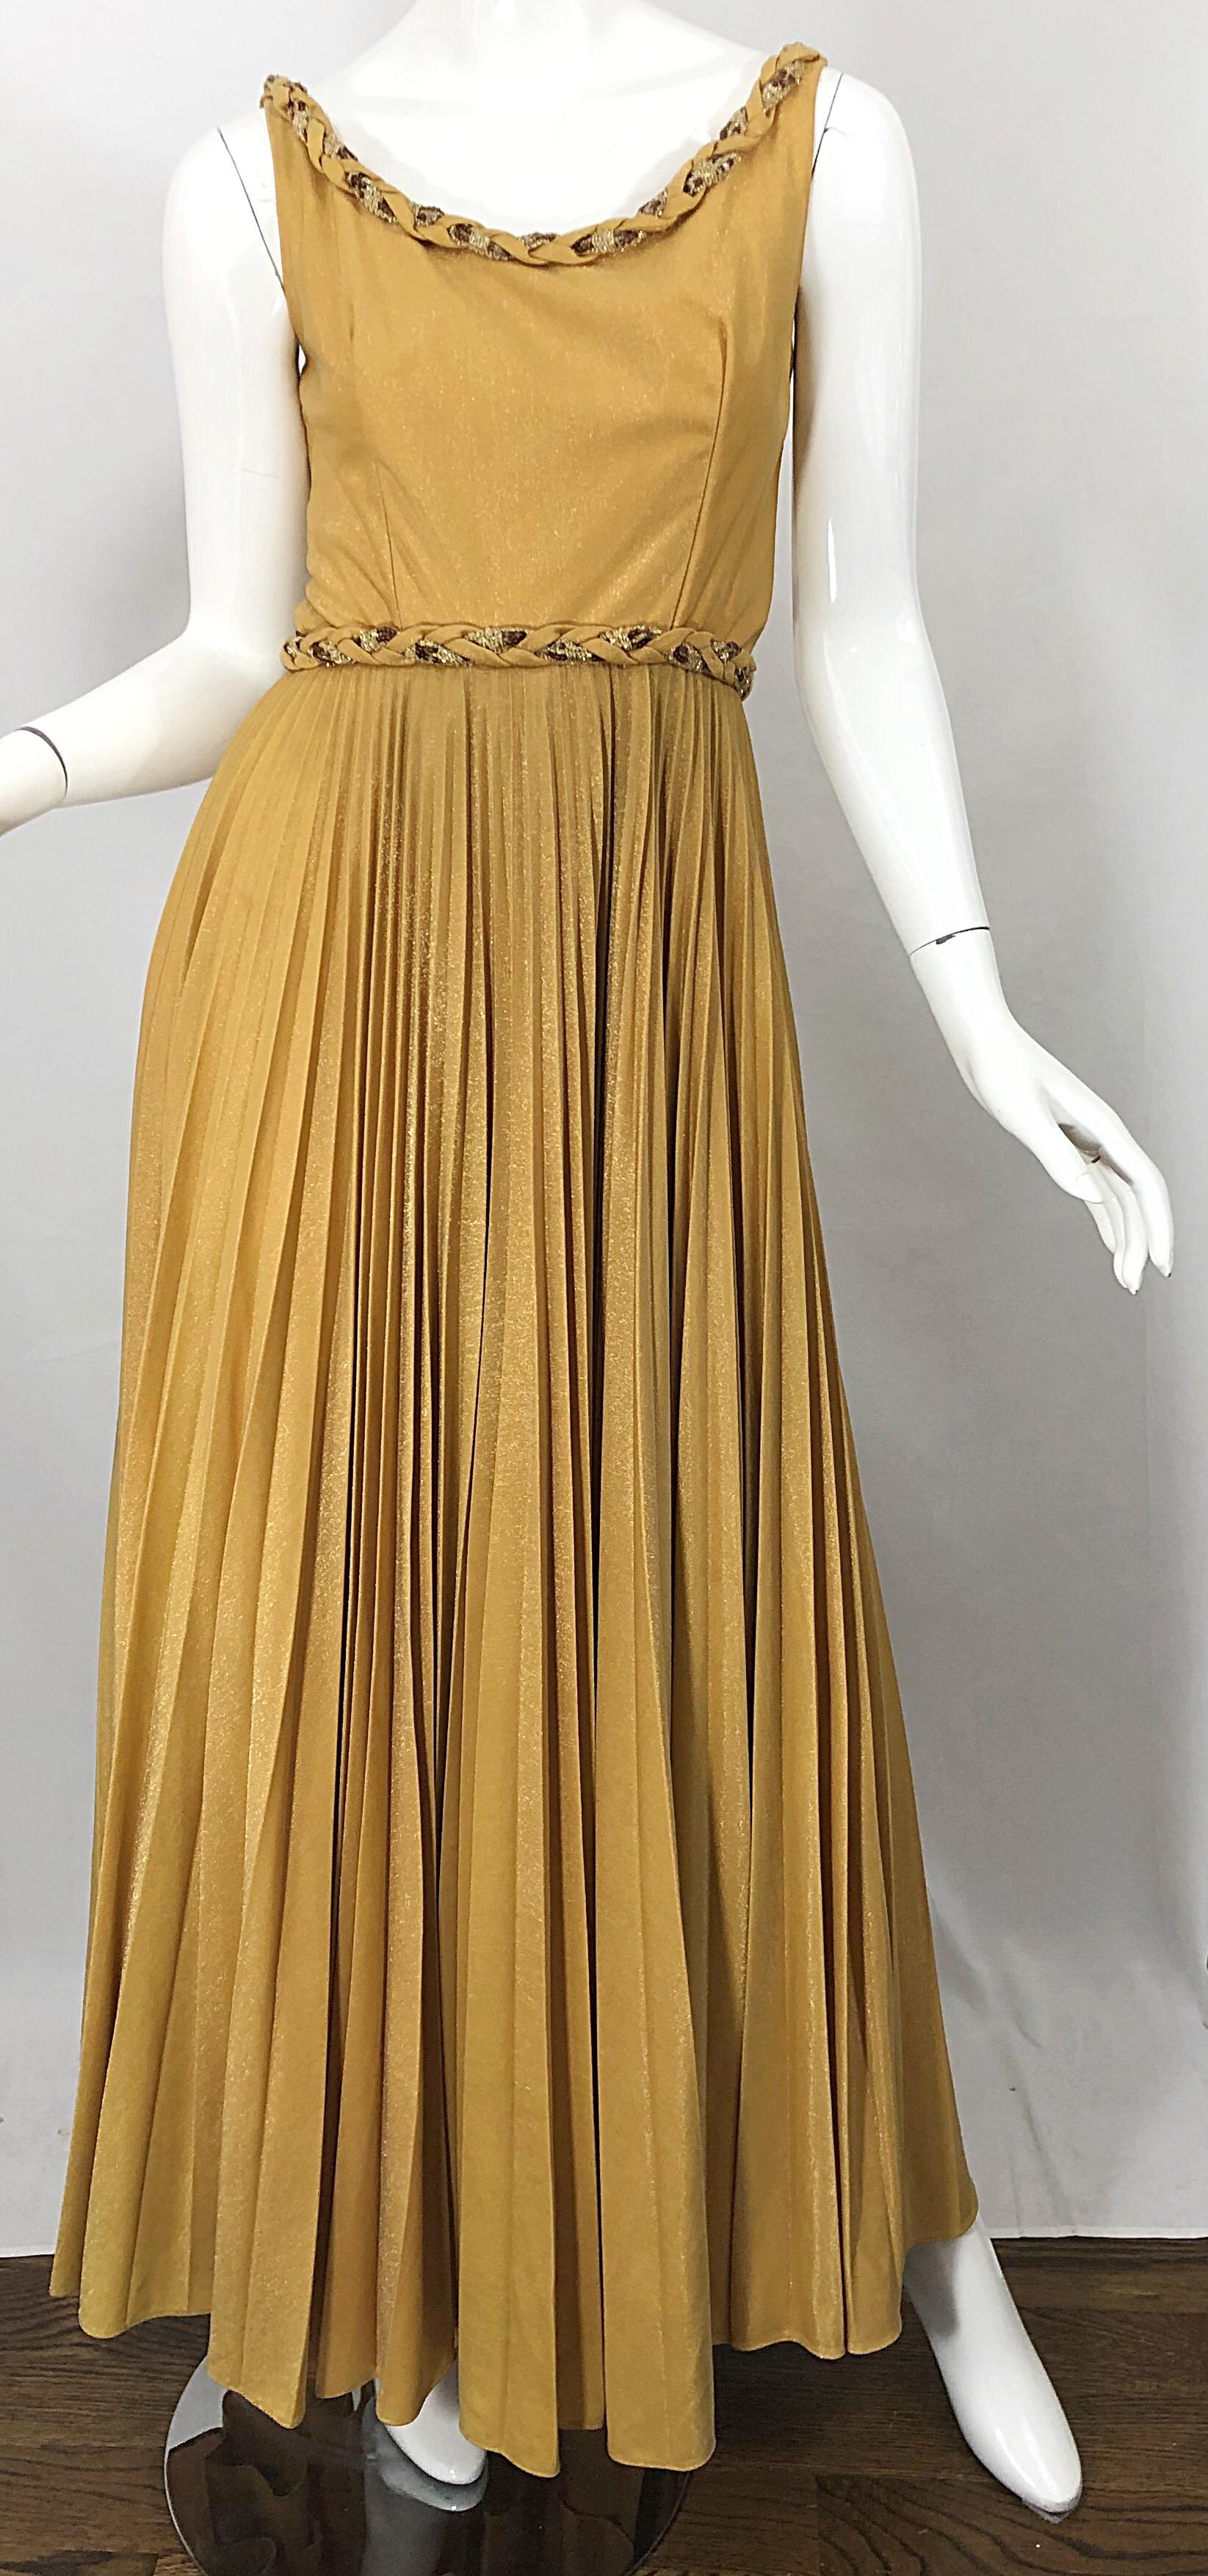 Women's Emma Domb 1970s Gold Metallic Jersey Grecian Style Sequined Vintage 70s Gown For Sale